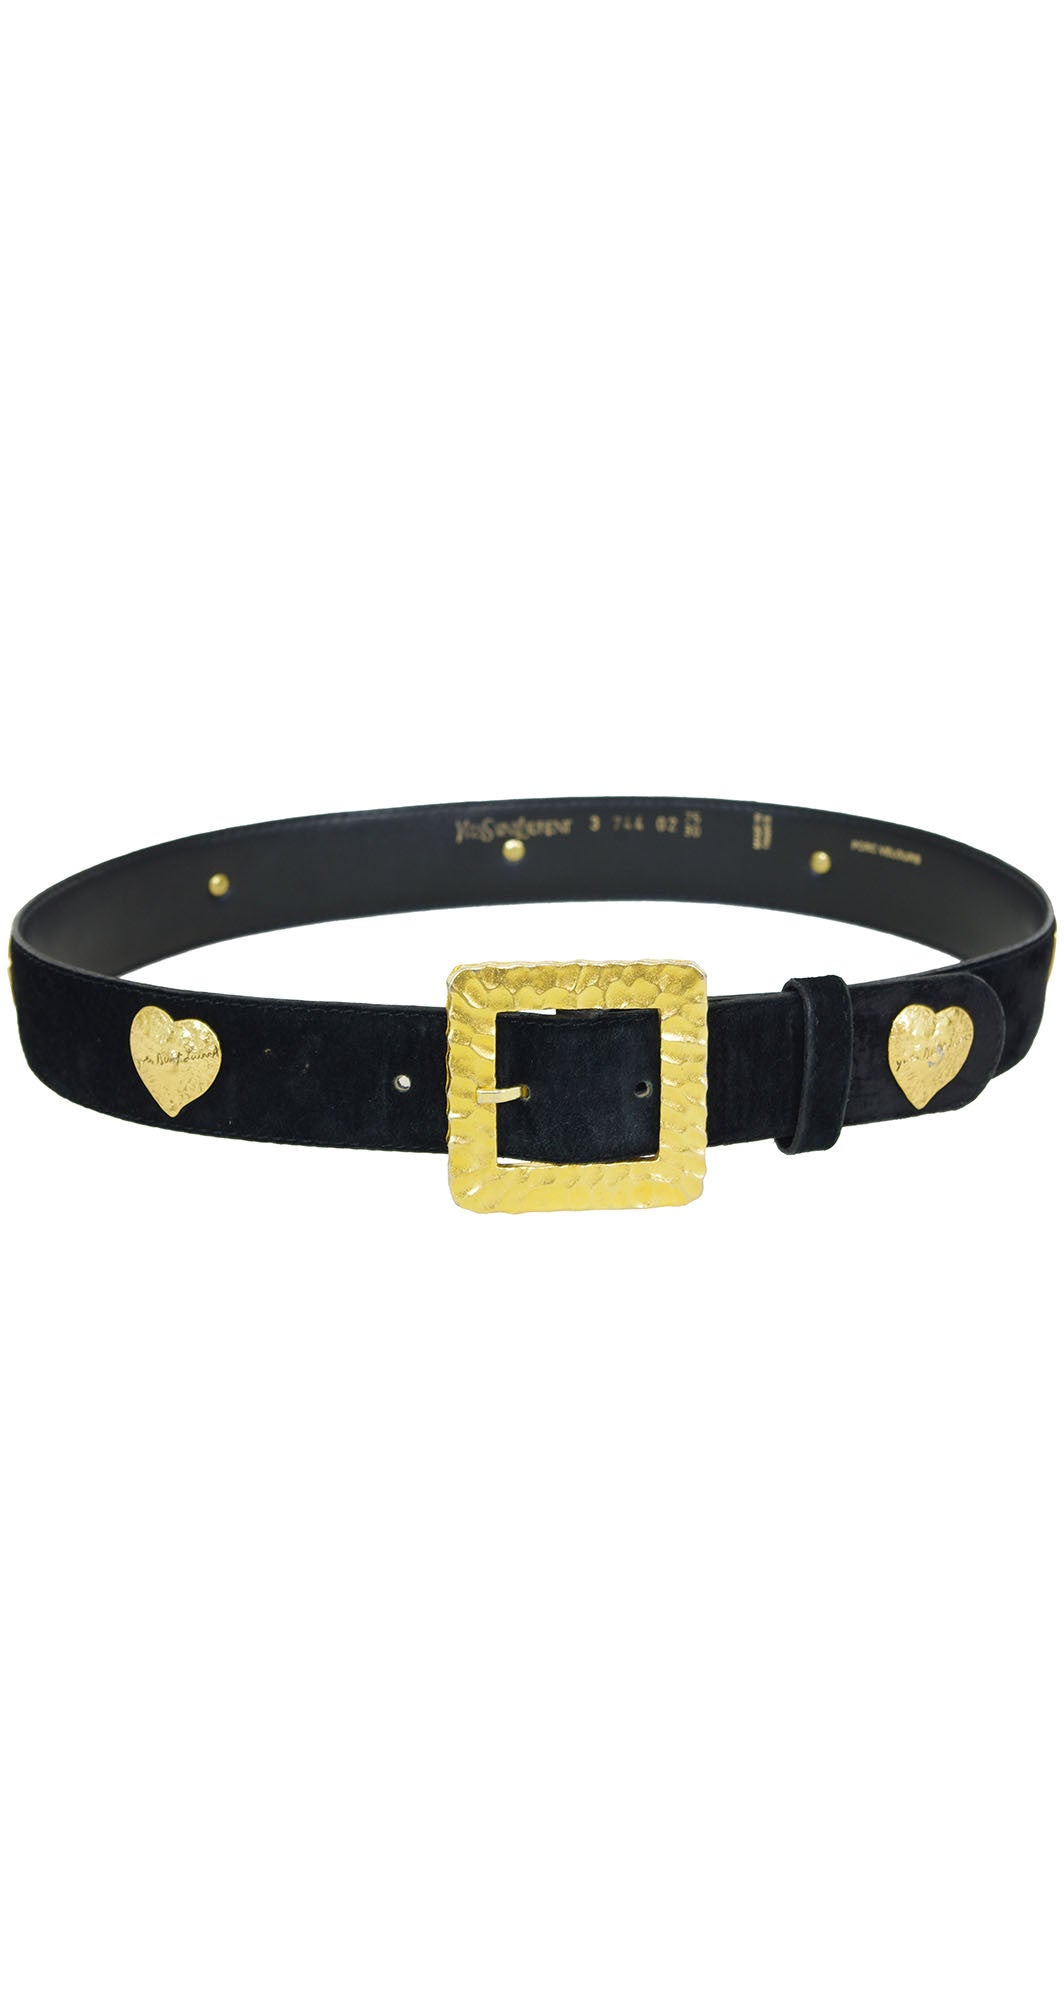 YSL Gold Tone Belt Buckle - Article Consignment